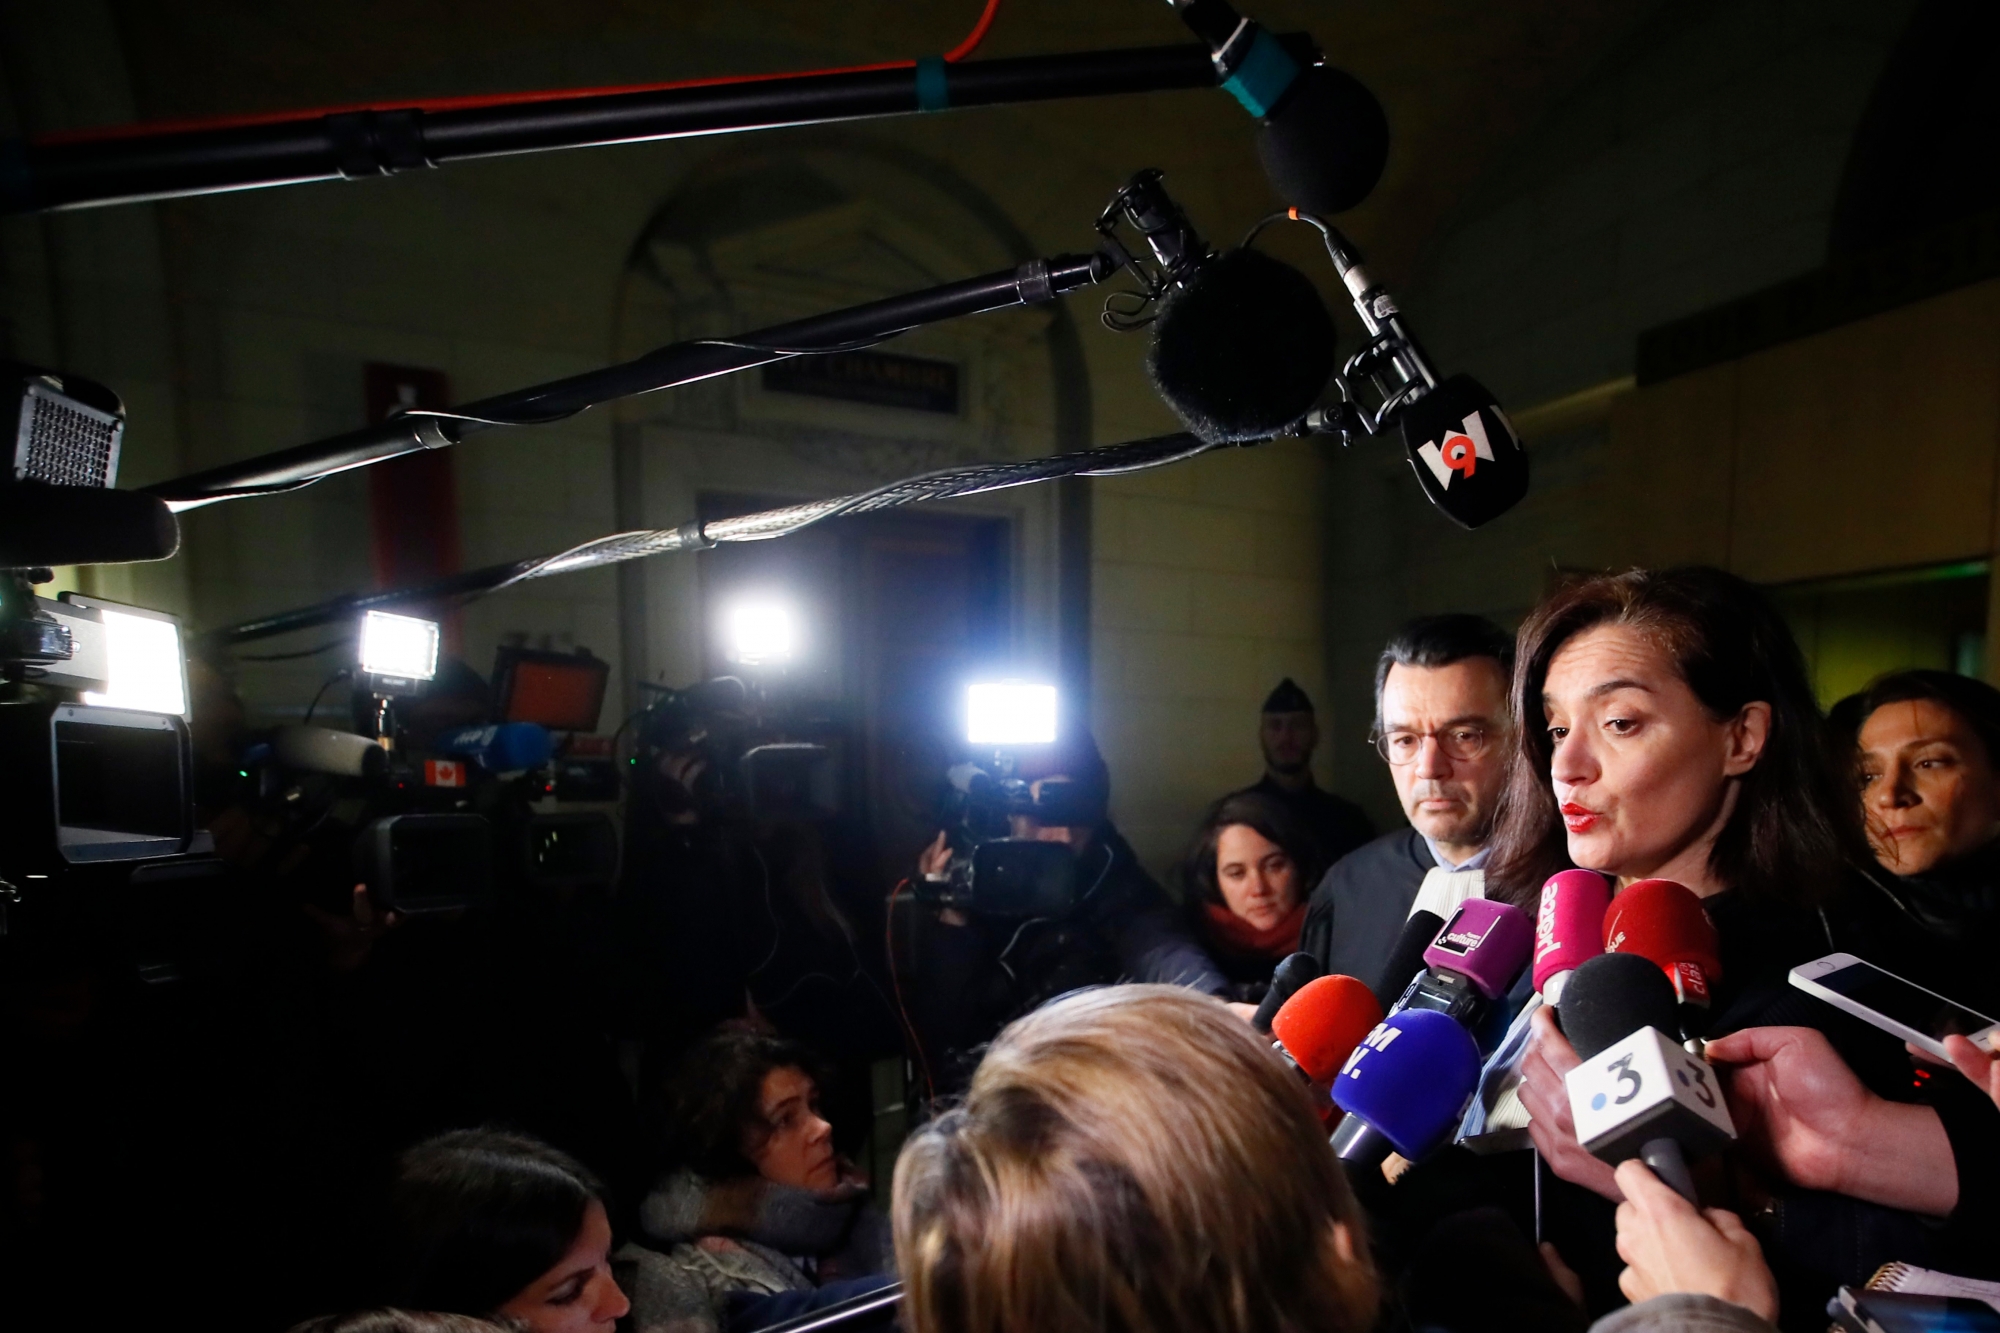 French lawyers Mario Stasi and Sophie Obadia, right, defending a Canadian tourist speak to the press after walking out of the court in Paris, Thursday, Jan. 31, 2019. Two anti-gang French policemen have been found guilty of raping a 39-year-old Canadian woman at a renowned Paris police headquarters in 2014. (AP Photo/Francois Mori) France Rape Trial